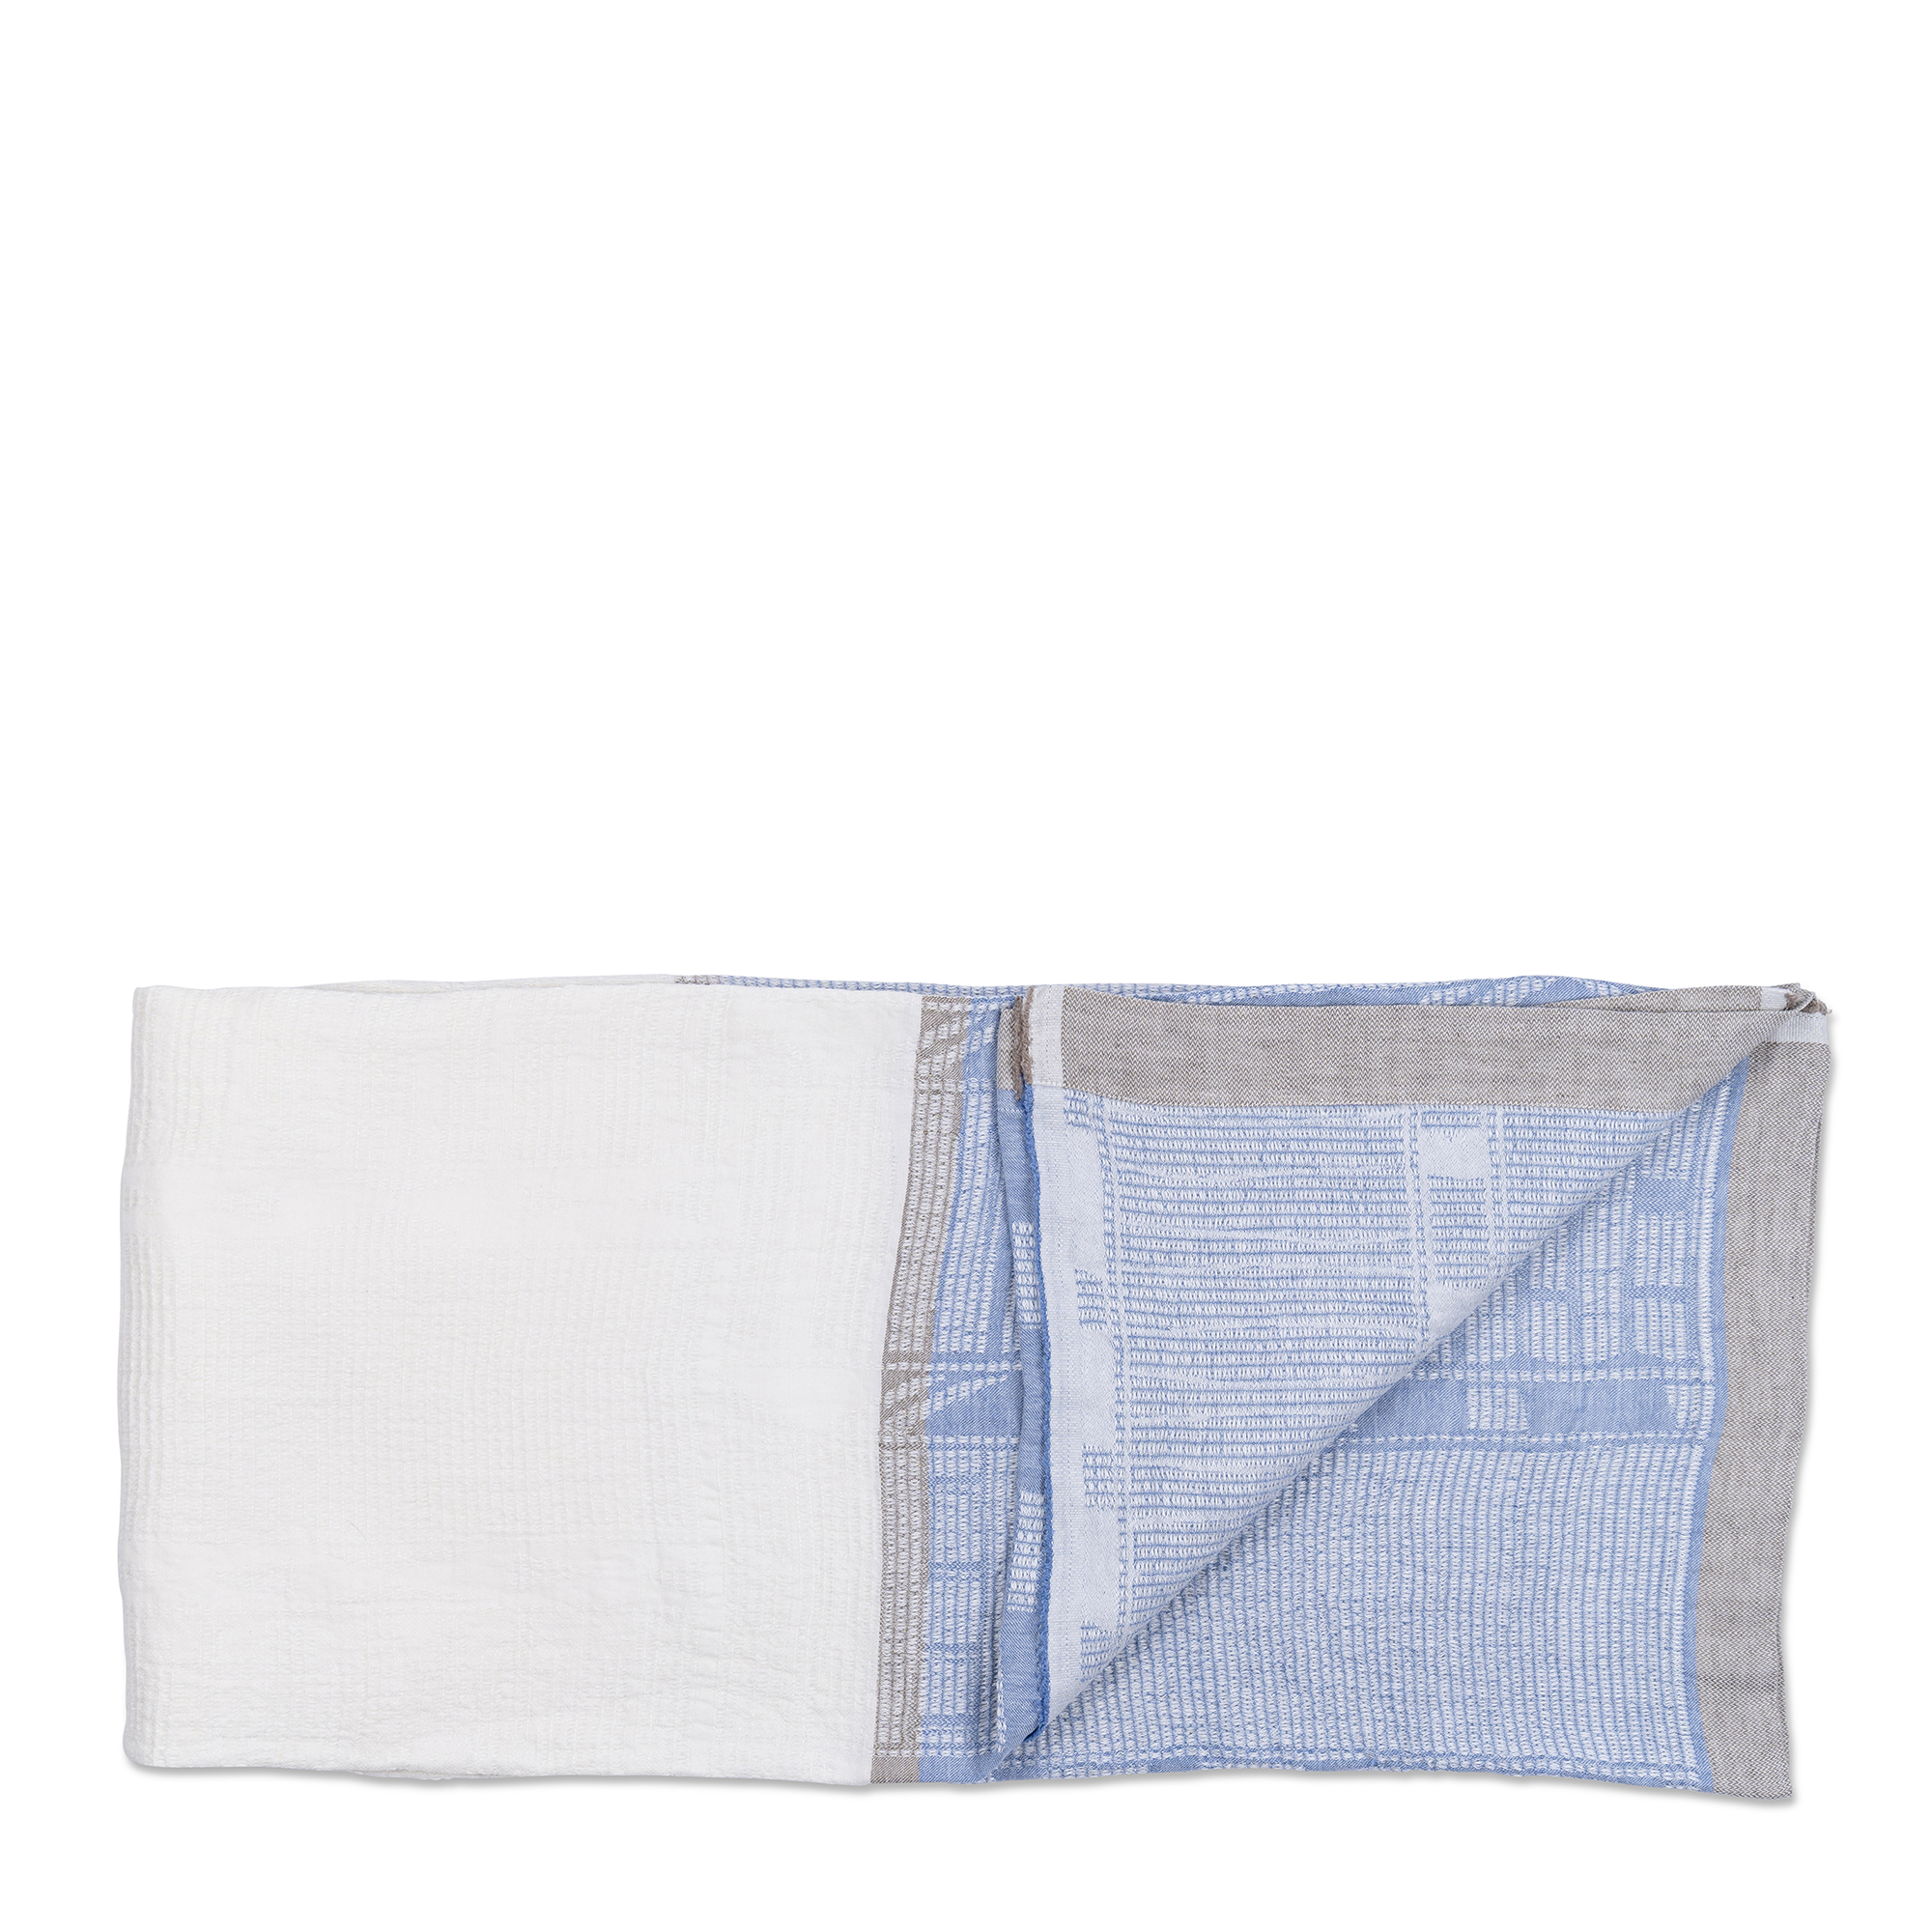 This linen throw features a combination of white and sky blue sections, accented with gray borders. The blue section displays intricate patterns, this throw adds a touch of simple elegance and texture to your home.